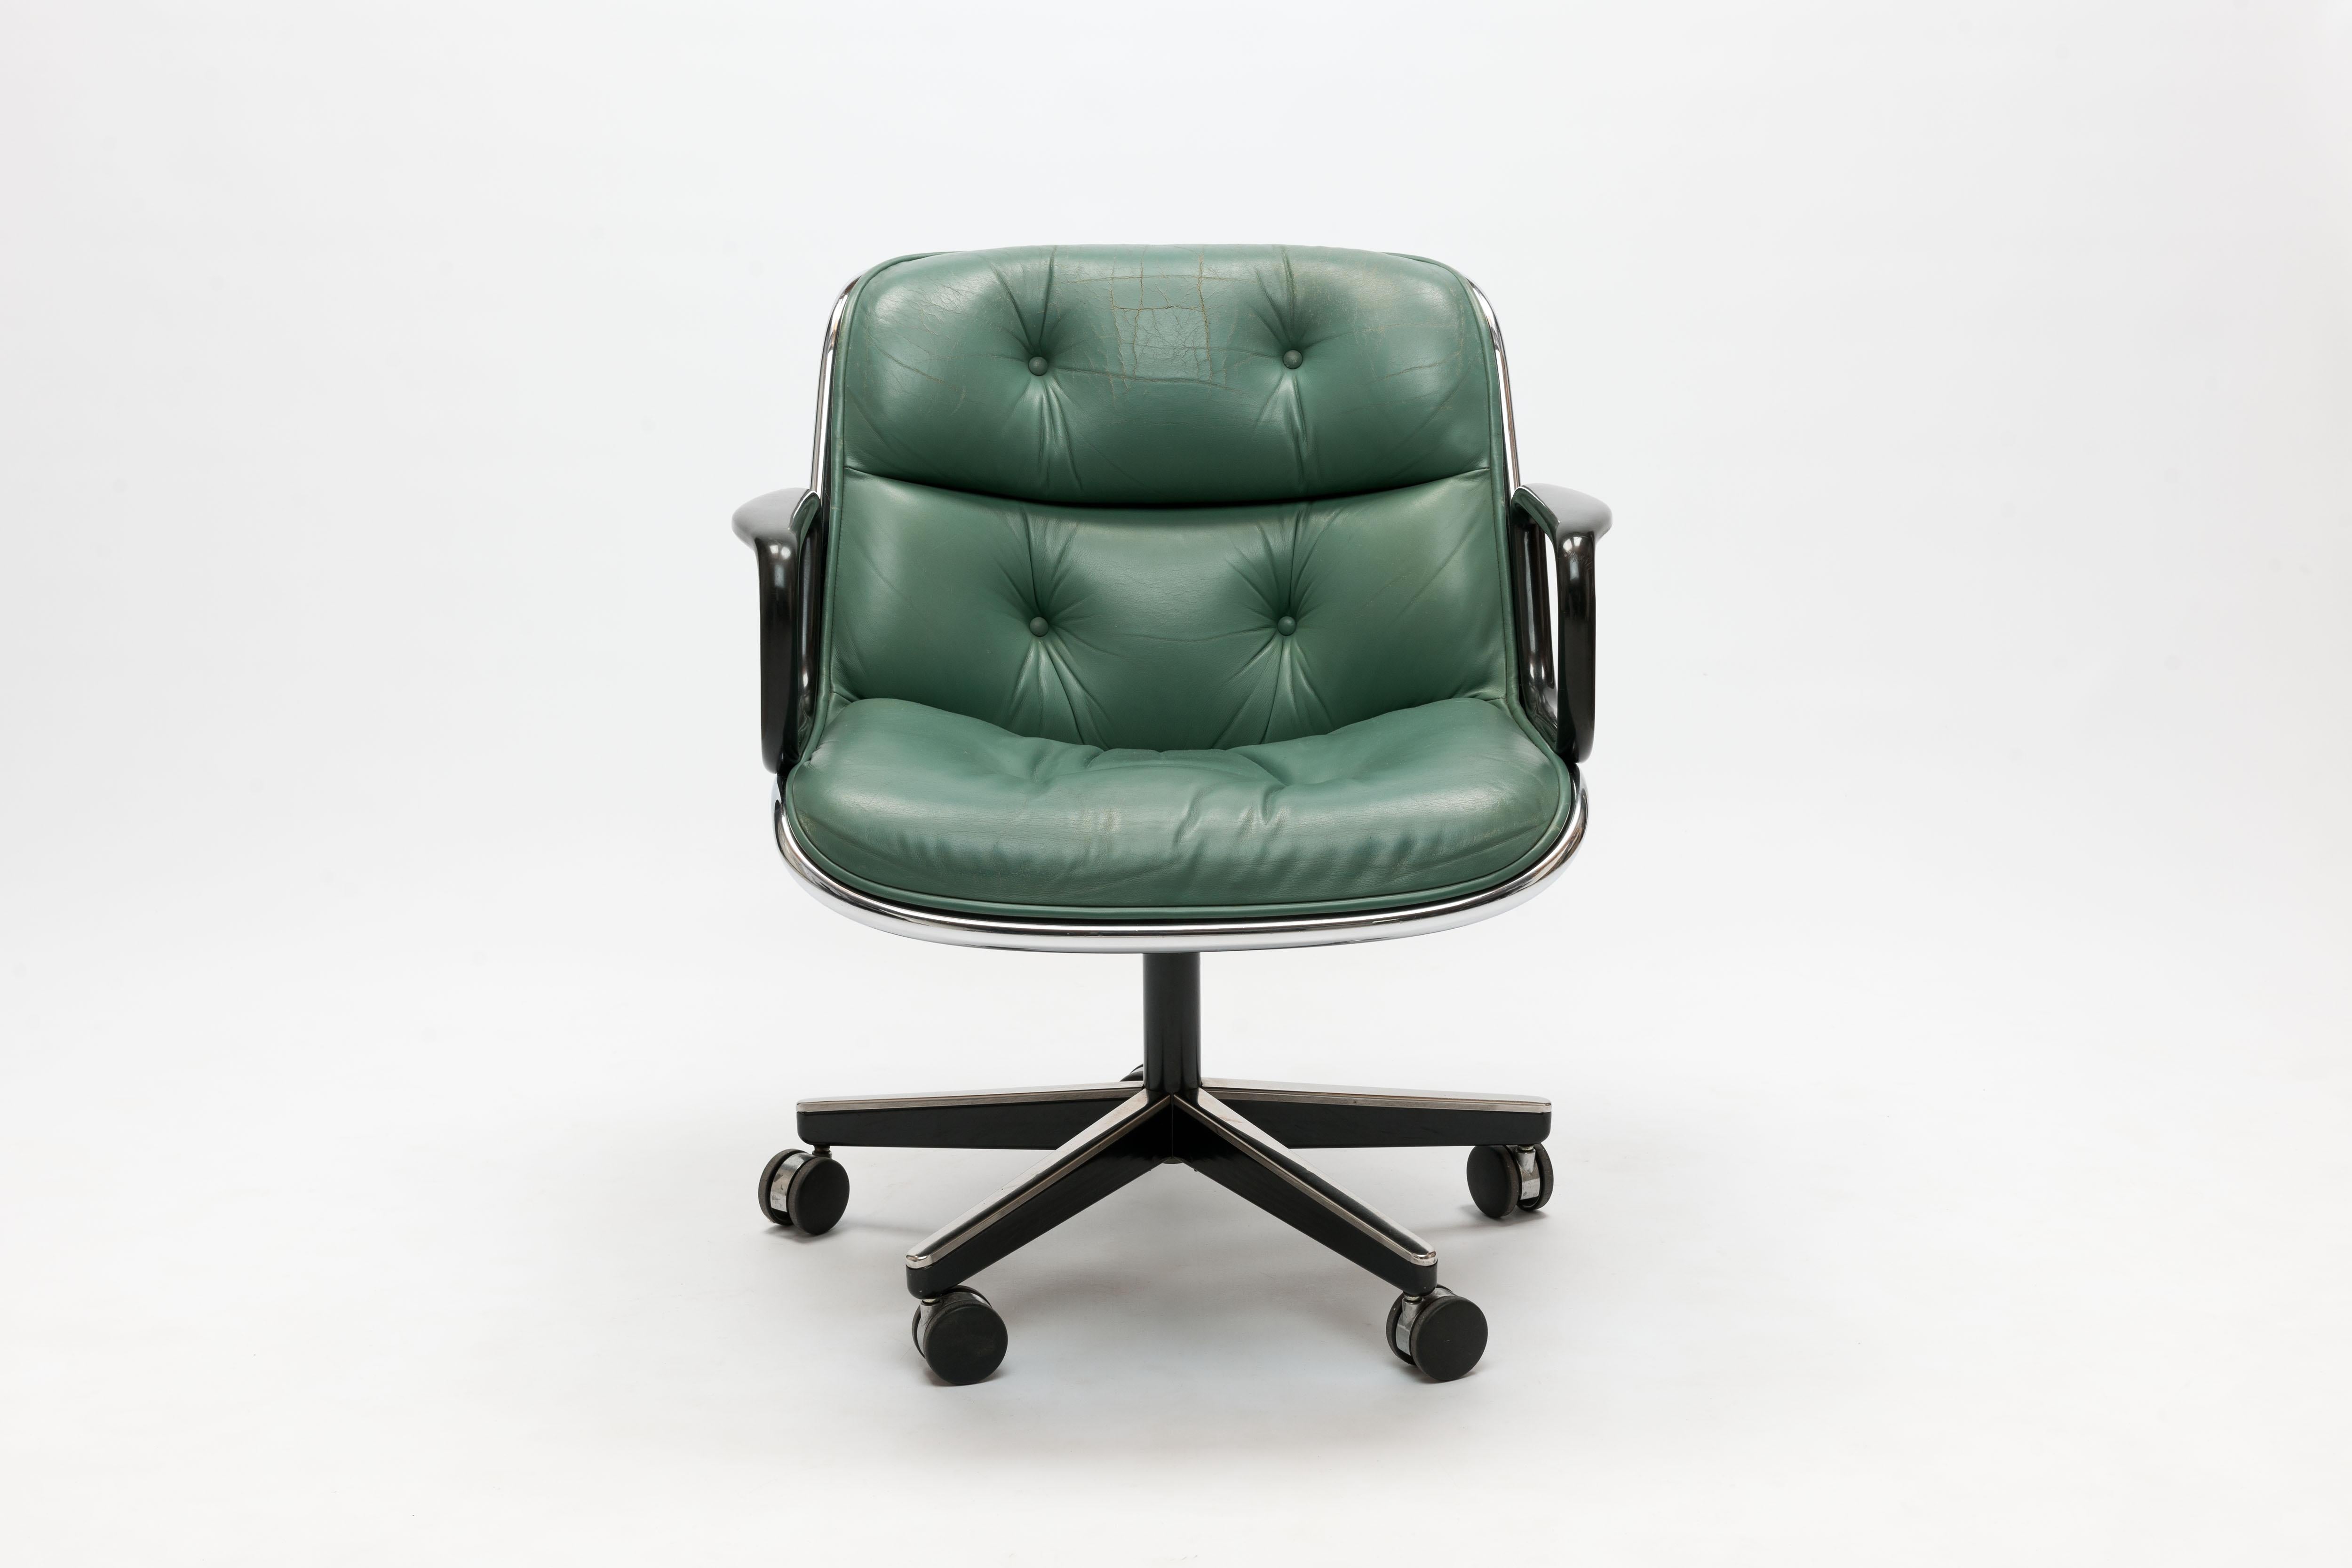 Iconic Charles Pollock executive swivel office chair in seafoam green leather on 5 star swivel base.
This chair, that was originally designed in 1963, is without any doubt one of the most comfortable office chairs that one can find.

Seat height